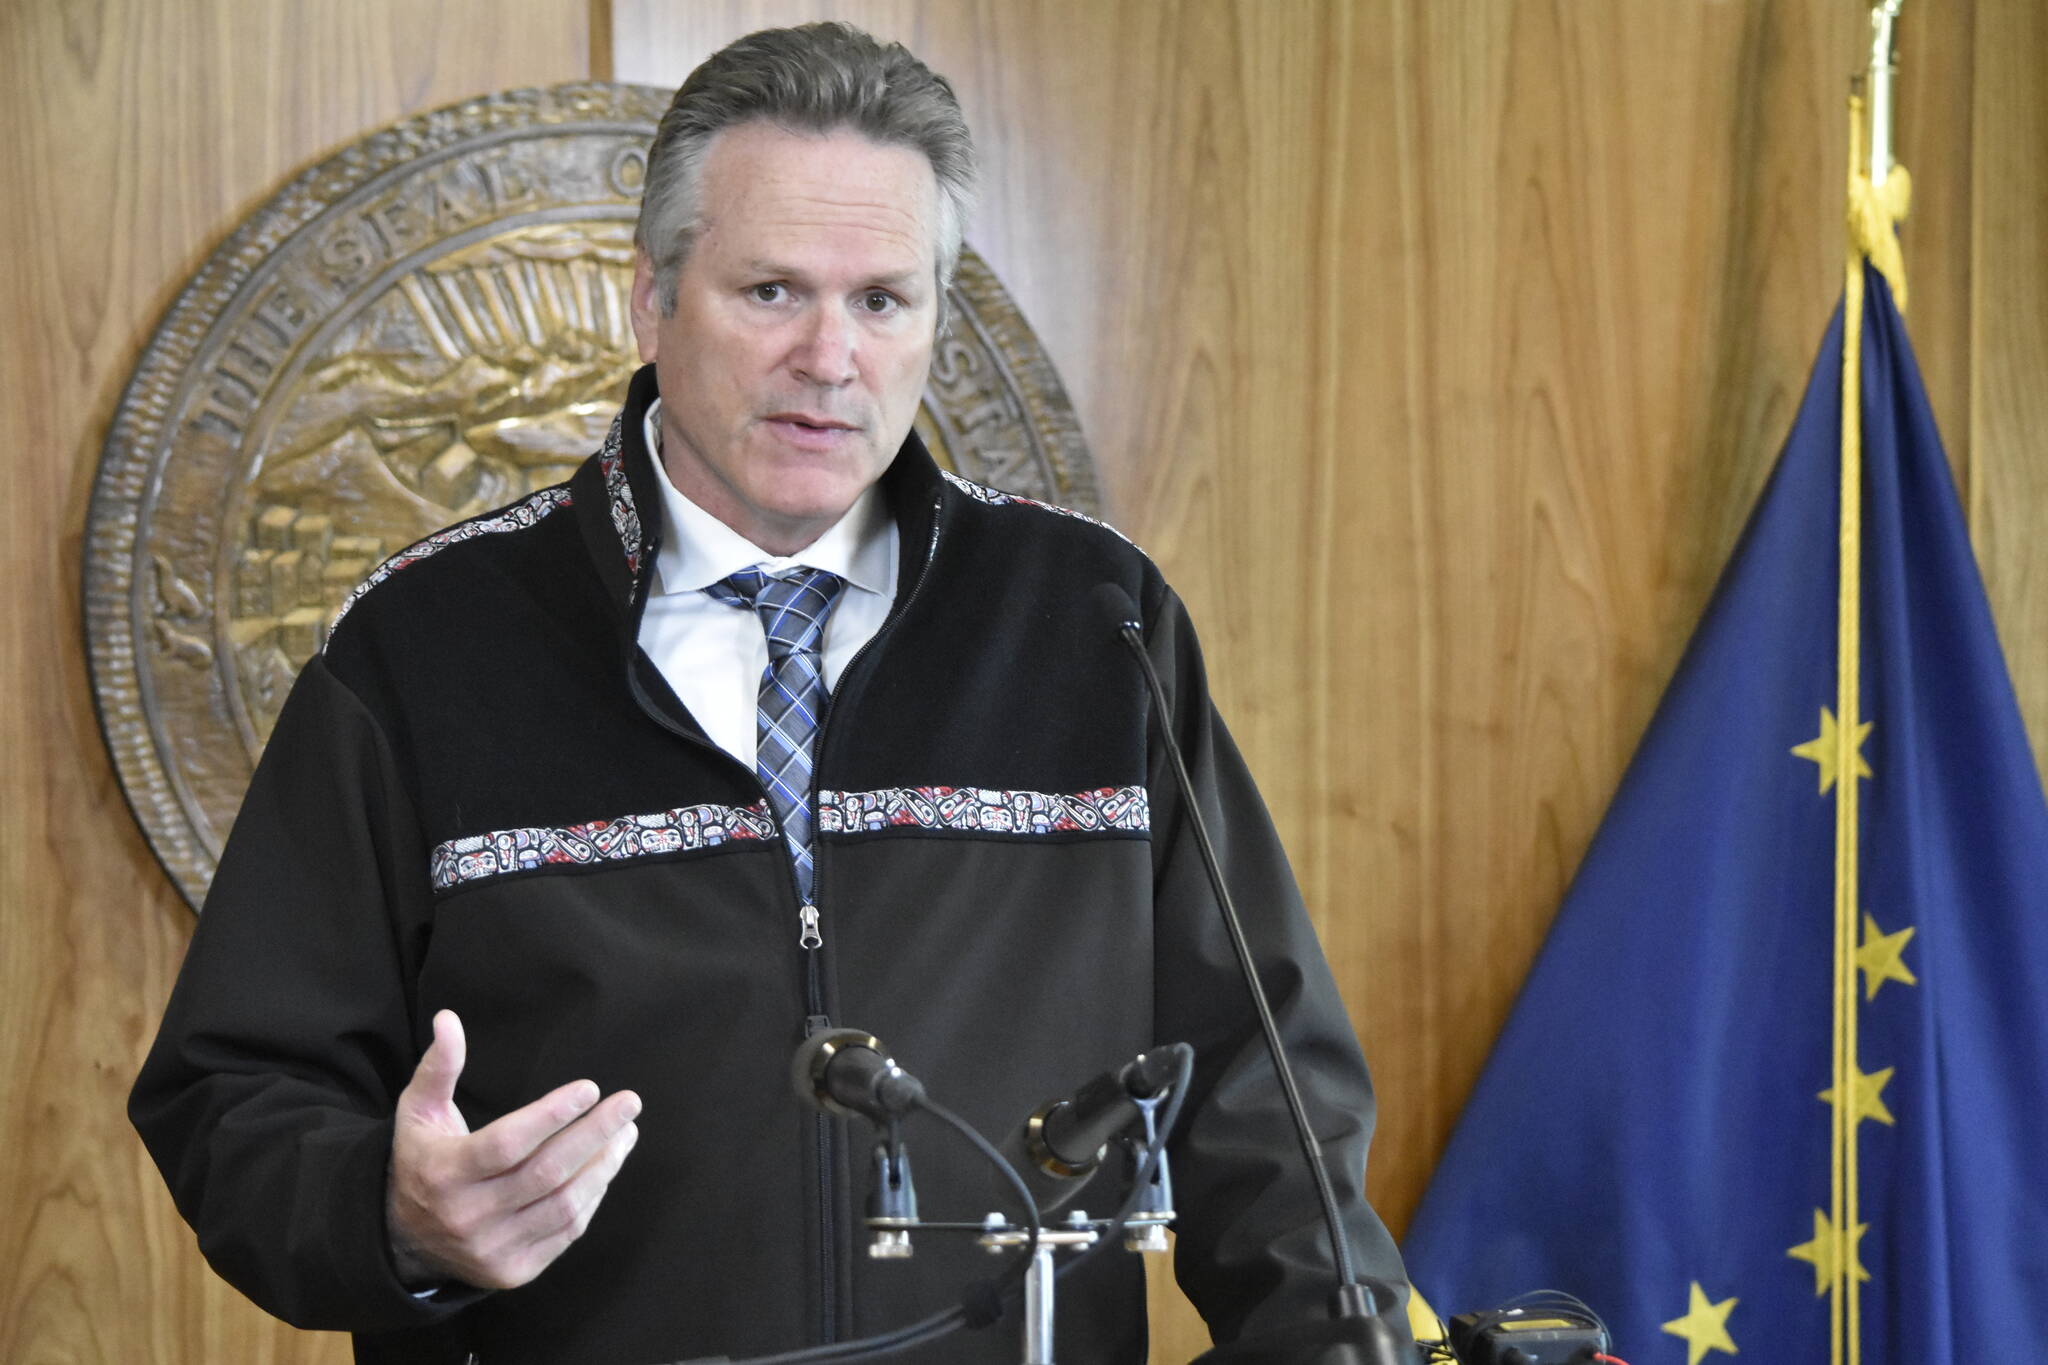 Gov. Dunleavy called for Alaskans to be careful and avoid putting more demand on the perilously strained healthcare system as he announced measures to ease some of that demand during a press conference on Wednesday, Sept. 22, 2021. (Peter Segall / Juneau Empire File)